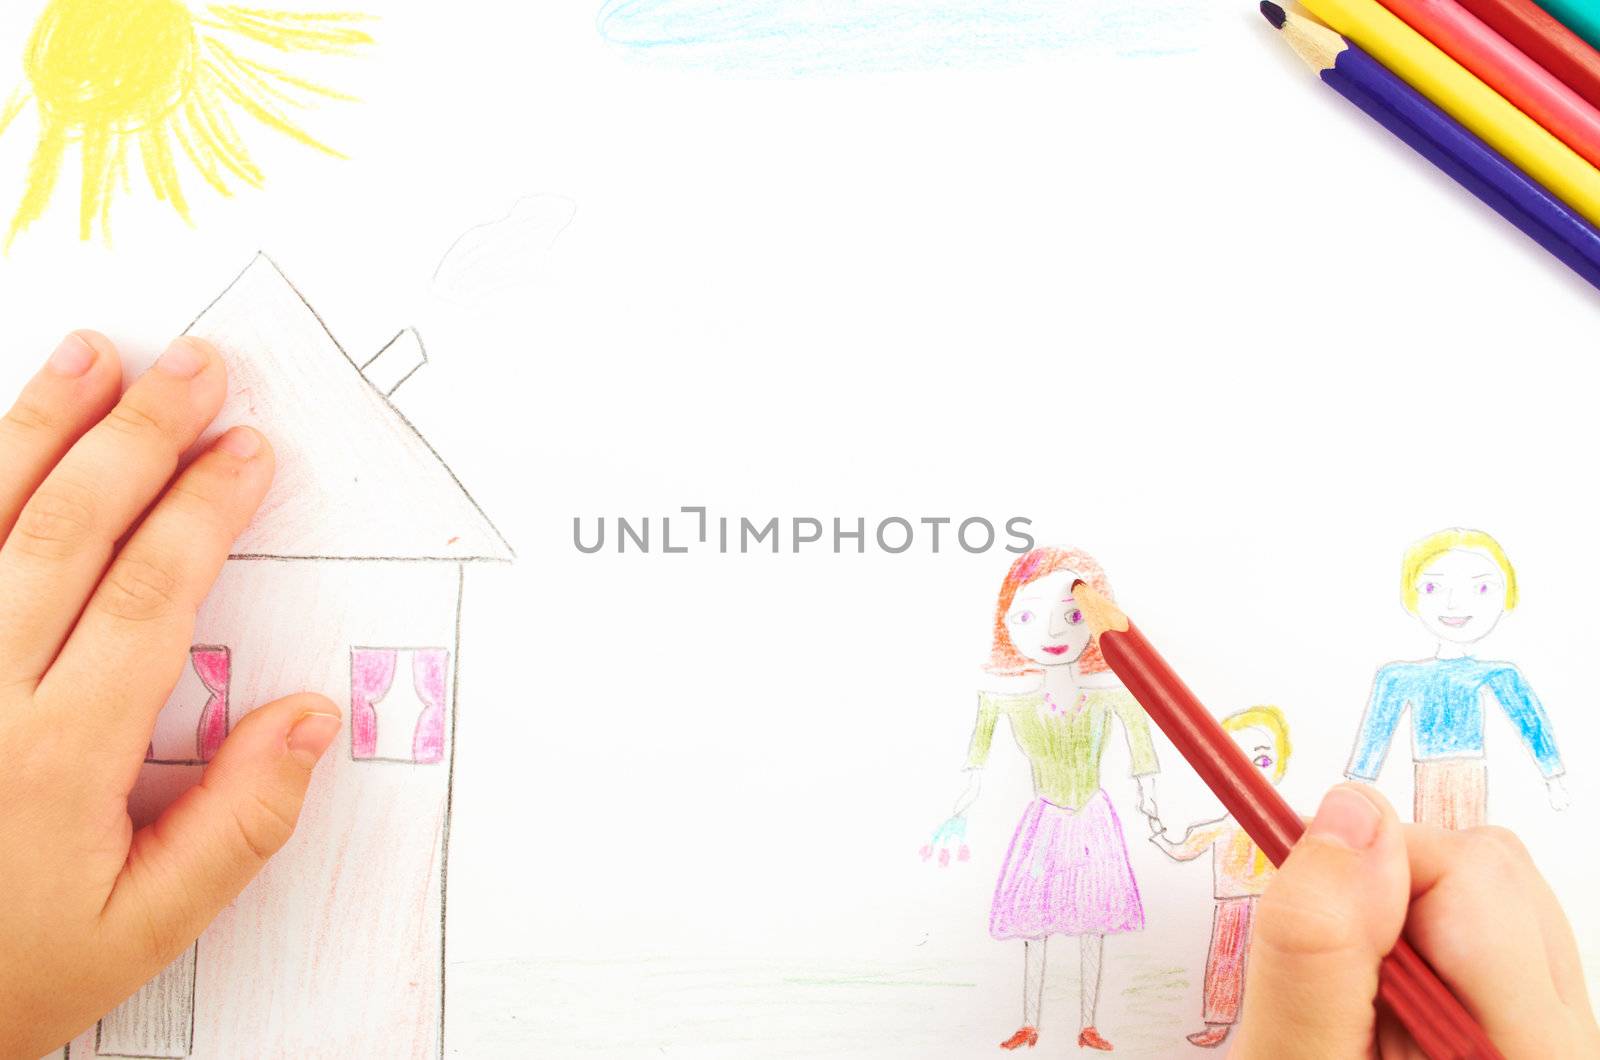 Children's hand painted design on a white sheet